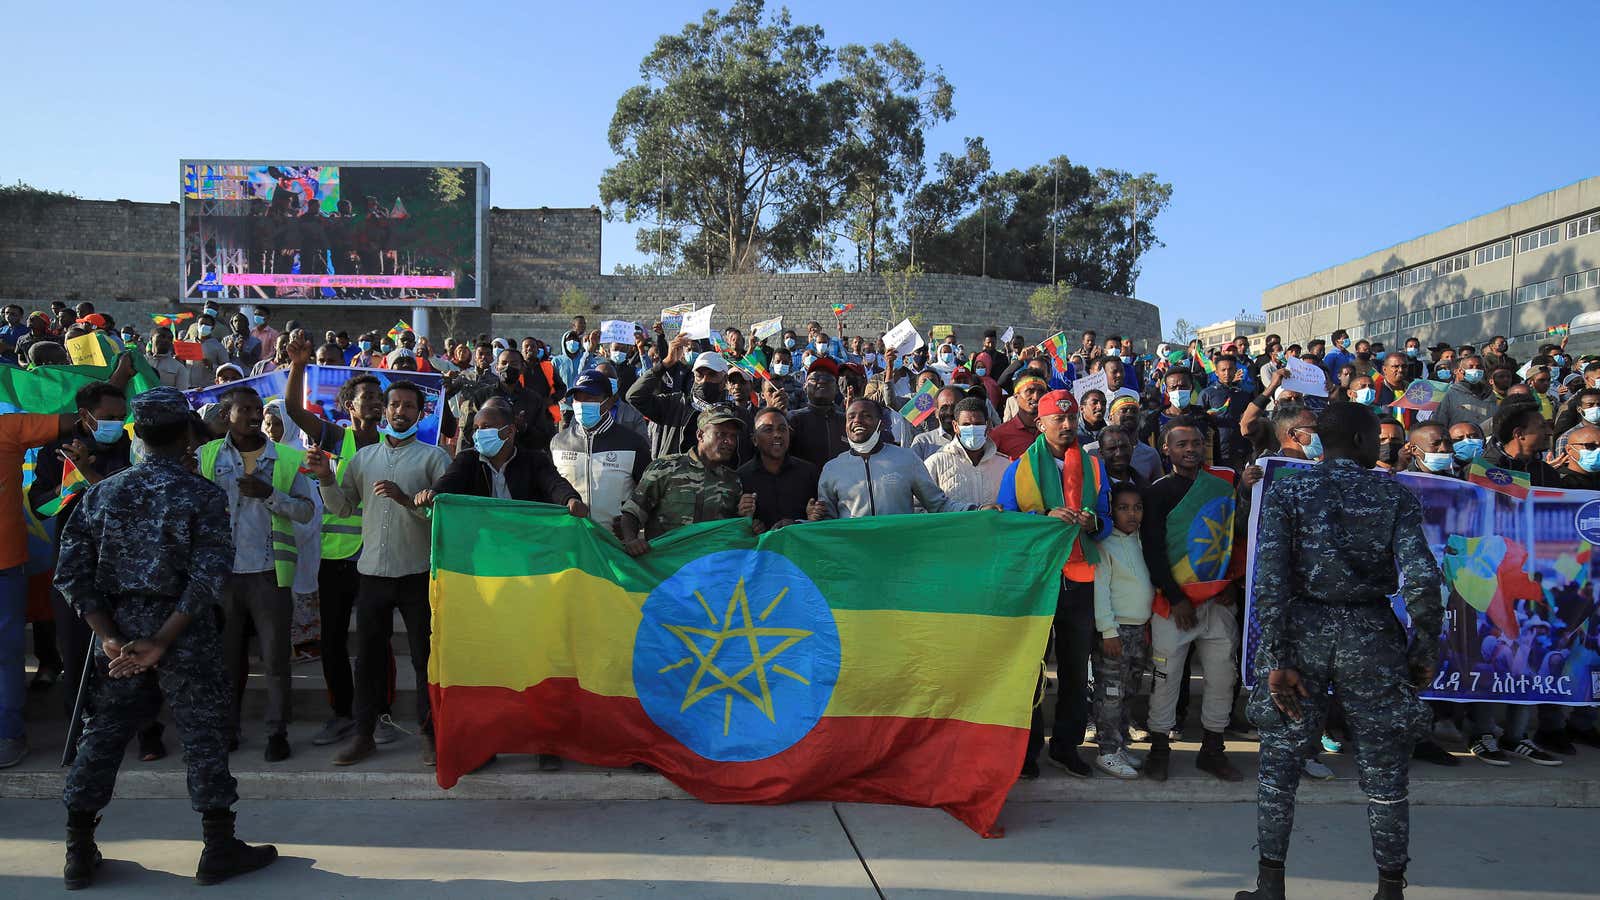 Ethiopiaâ€™s tech community members are also taking sides  in a war that has deeply polarized Ethiopians locally and abroad.